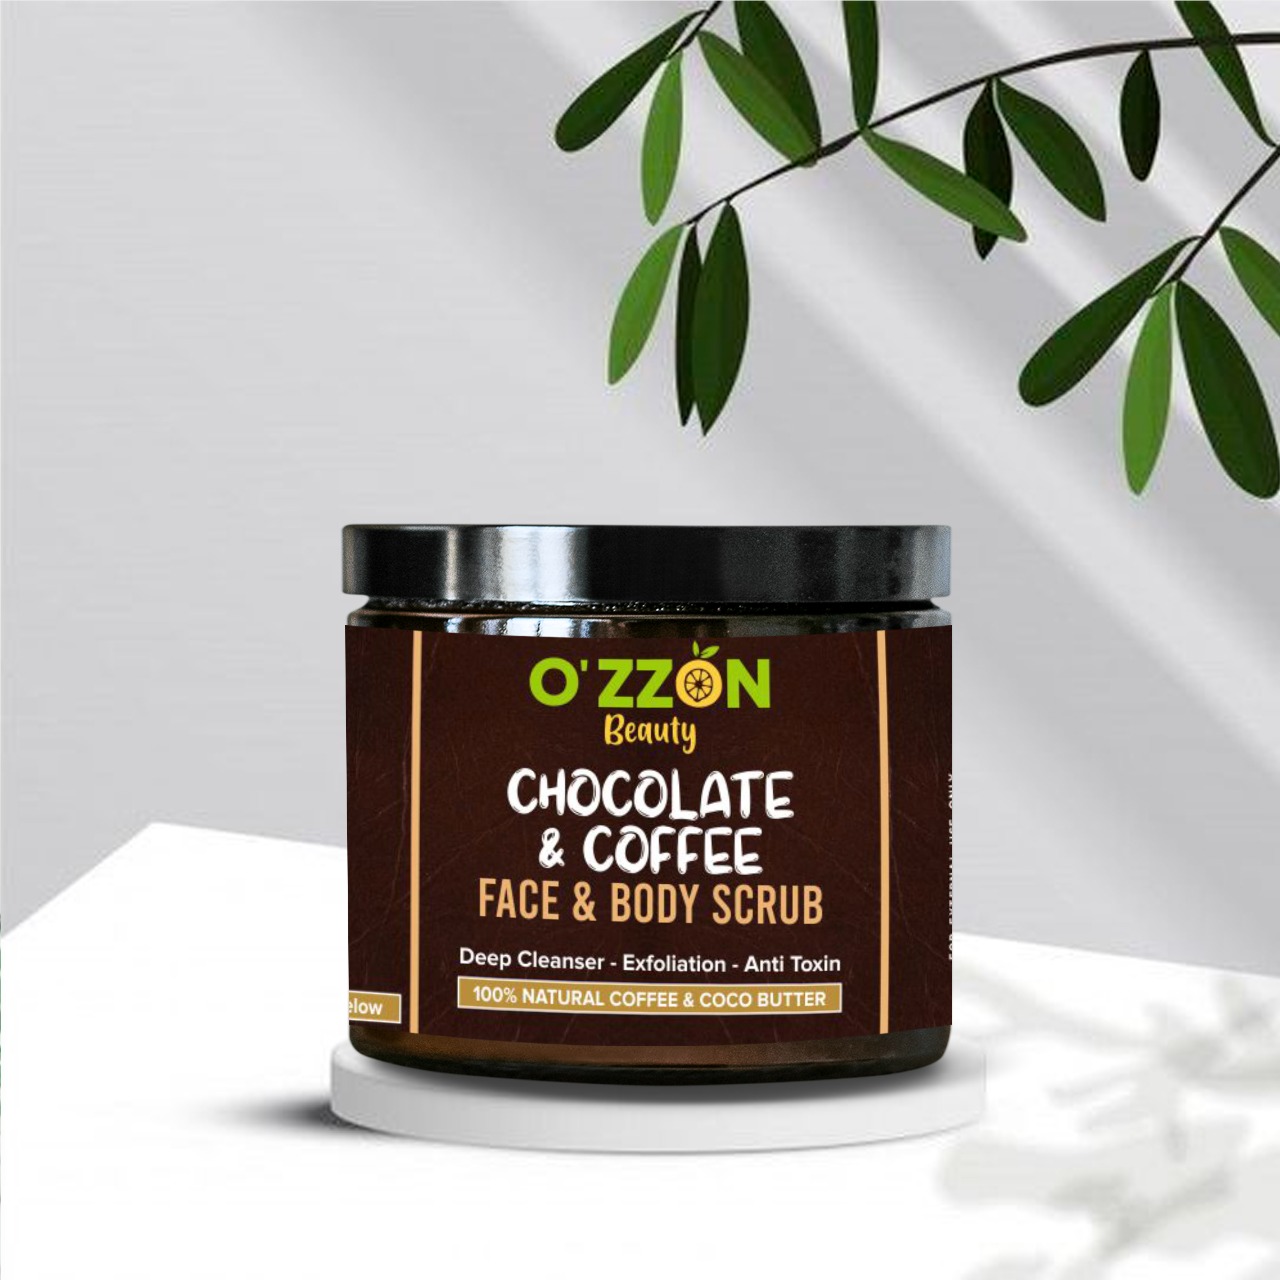 Online Shopping India, Ozzon Products, Chocolate Face & Body Scrub, Ozzon,